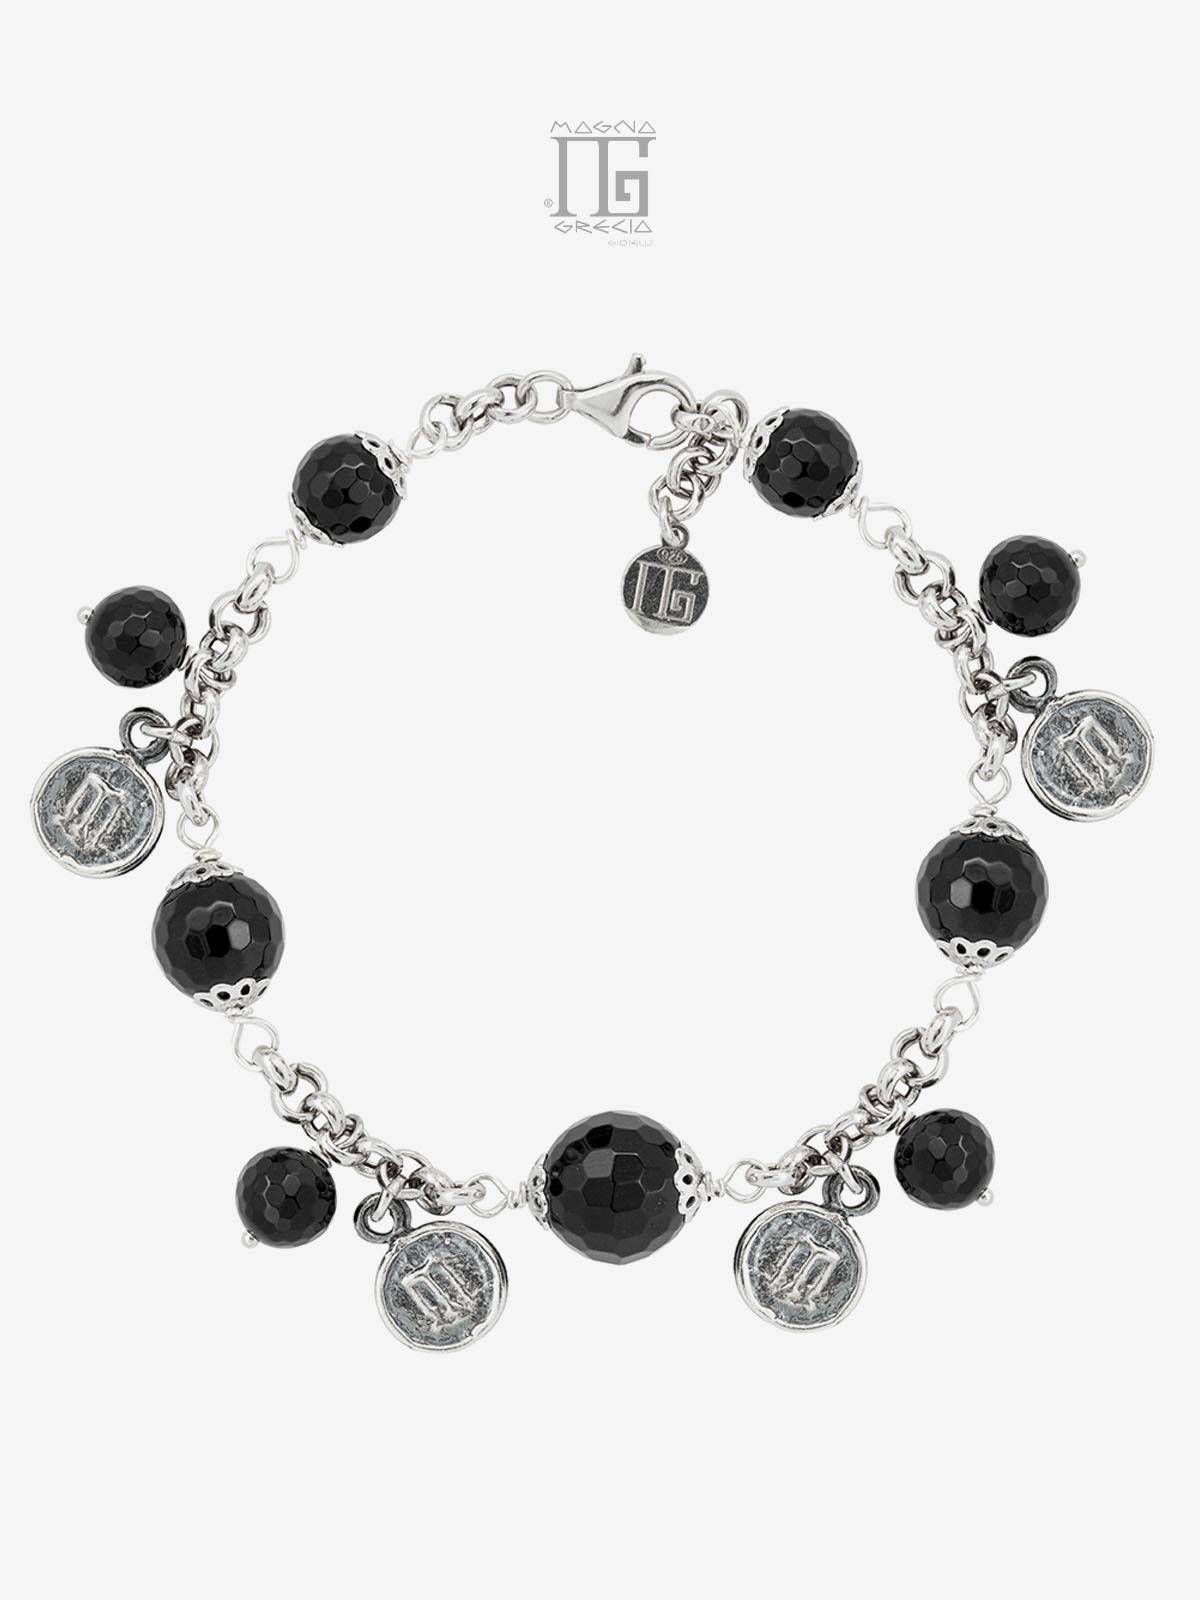 “Eleganza” Bracelet in Silver with Stater and Onyx Stones Cod. MGK 3871 V